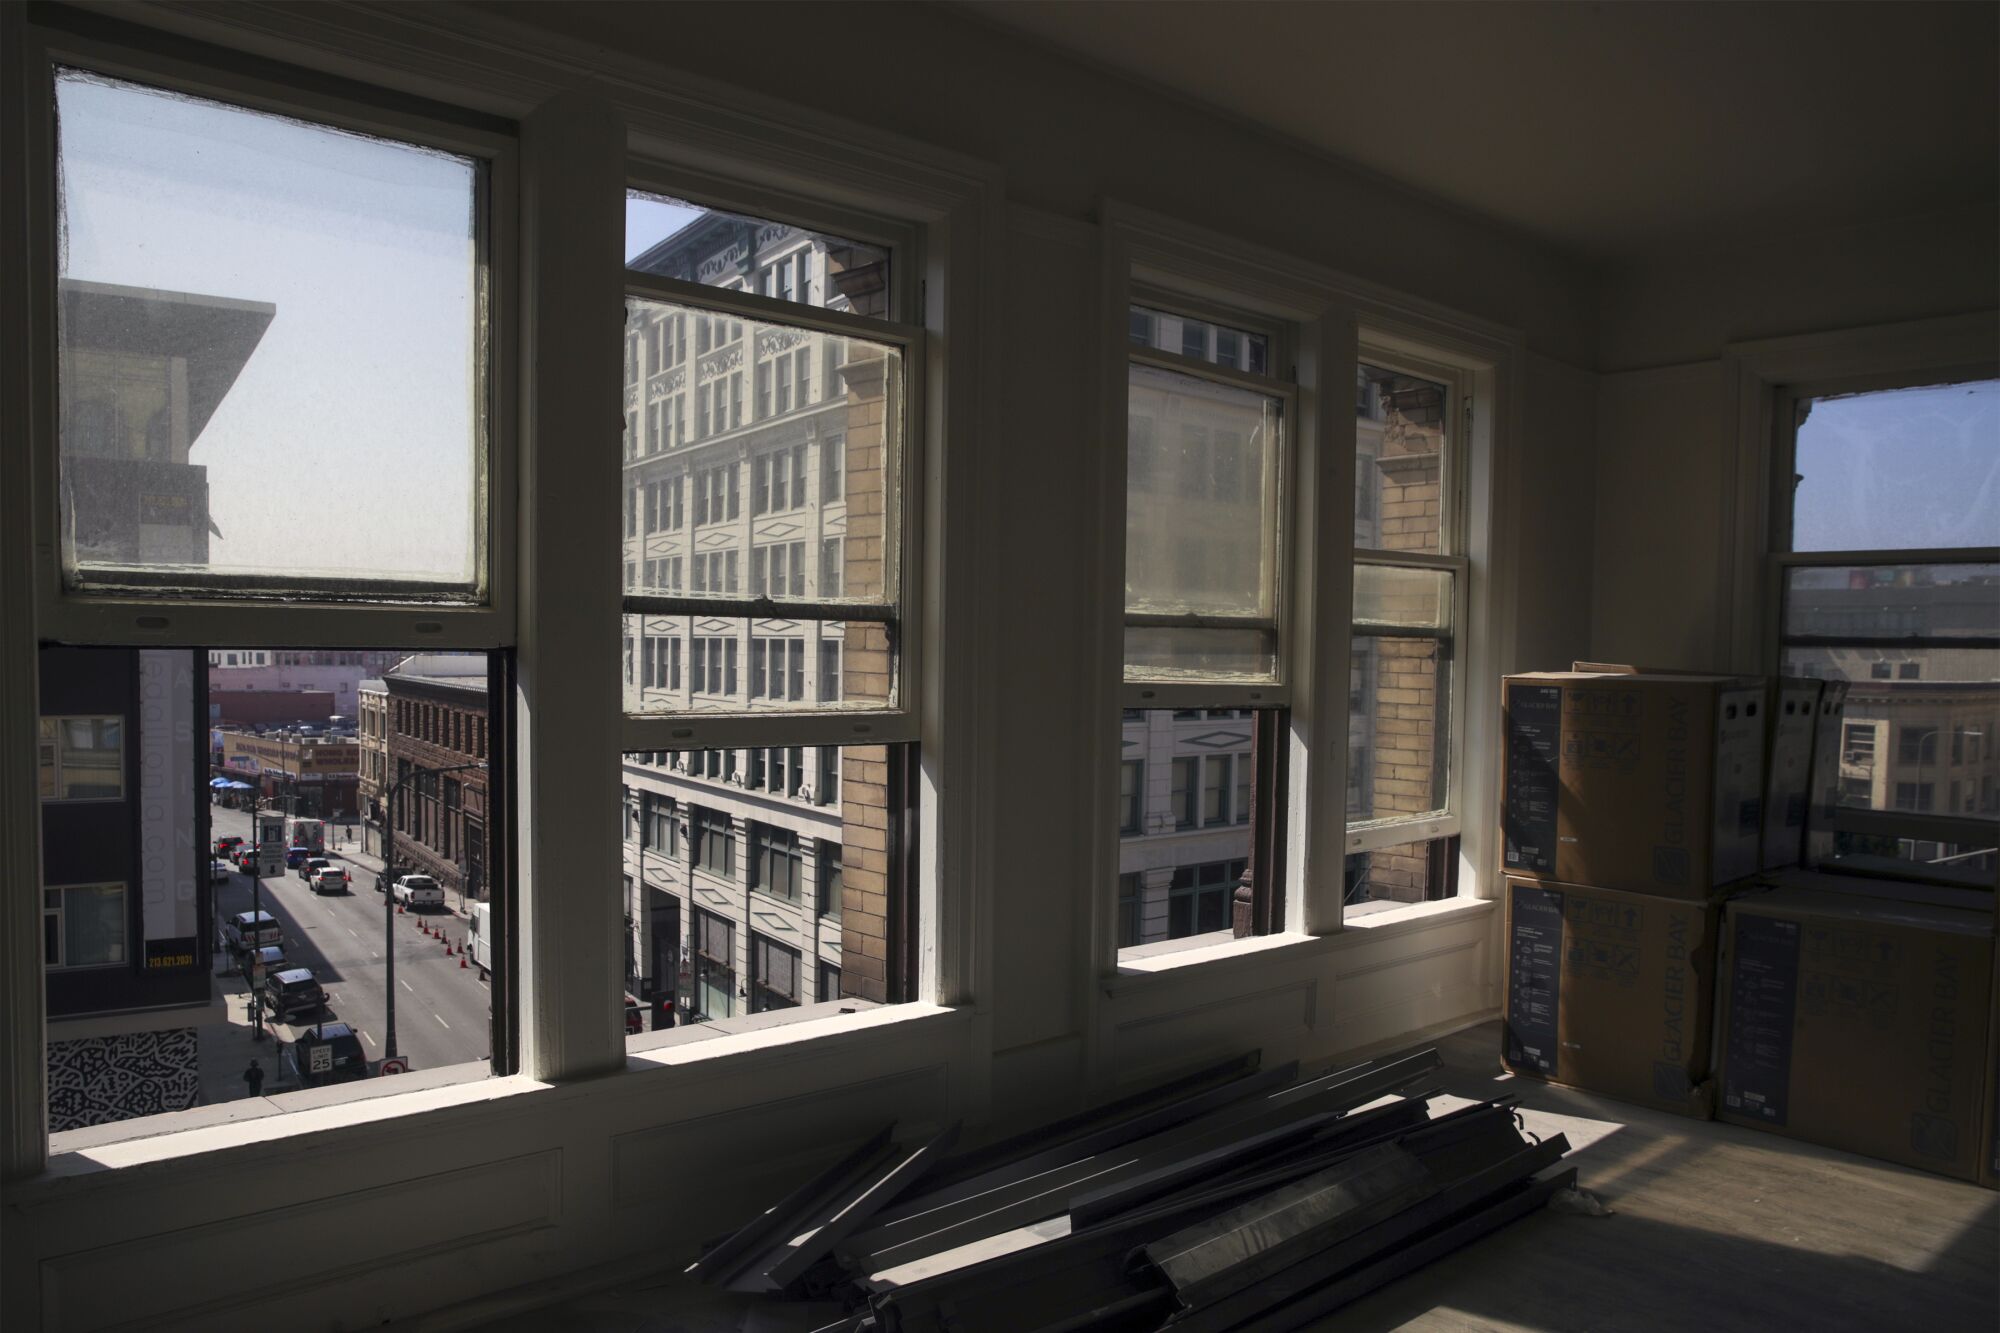 A view from inside and across a room under construction, with a sunlit street and buildings visible outside.